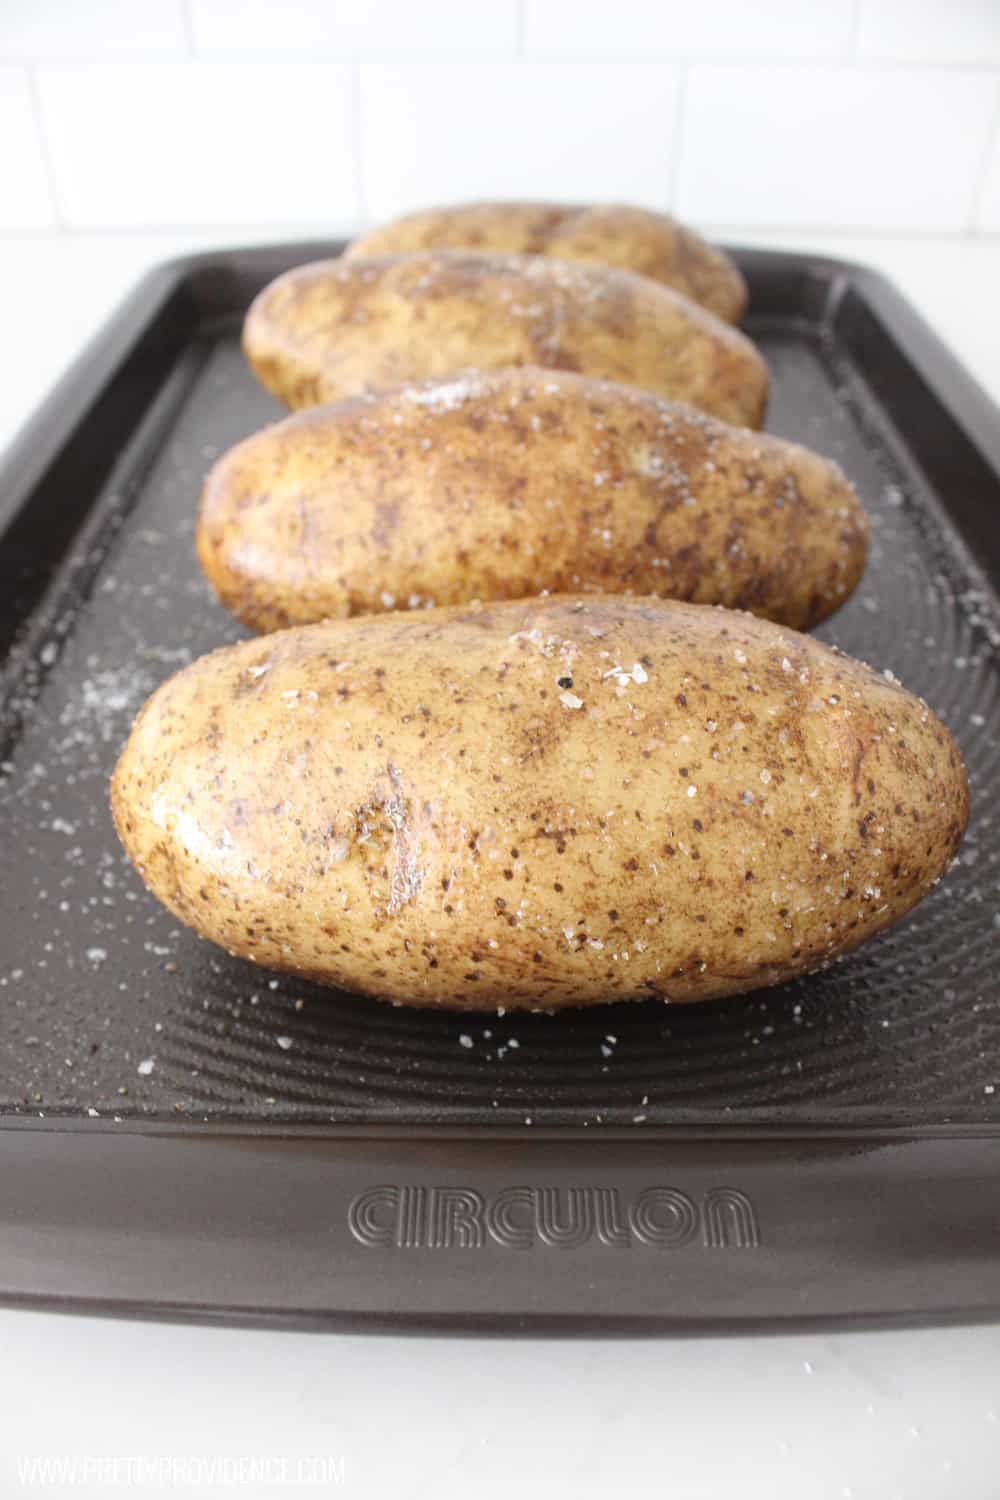 How to bake a perfect baked potato! There is no other way- a few extra minutes makes all the difference with these babies! 